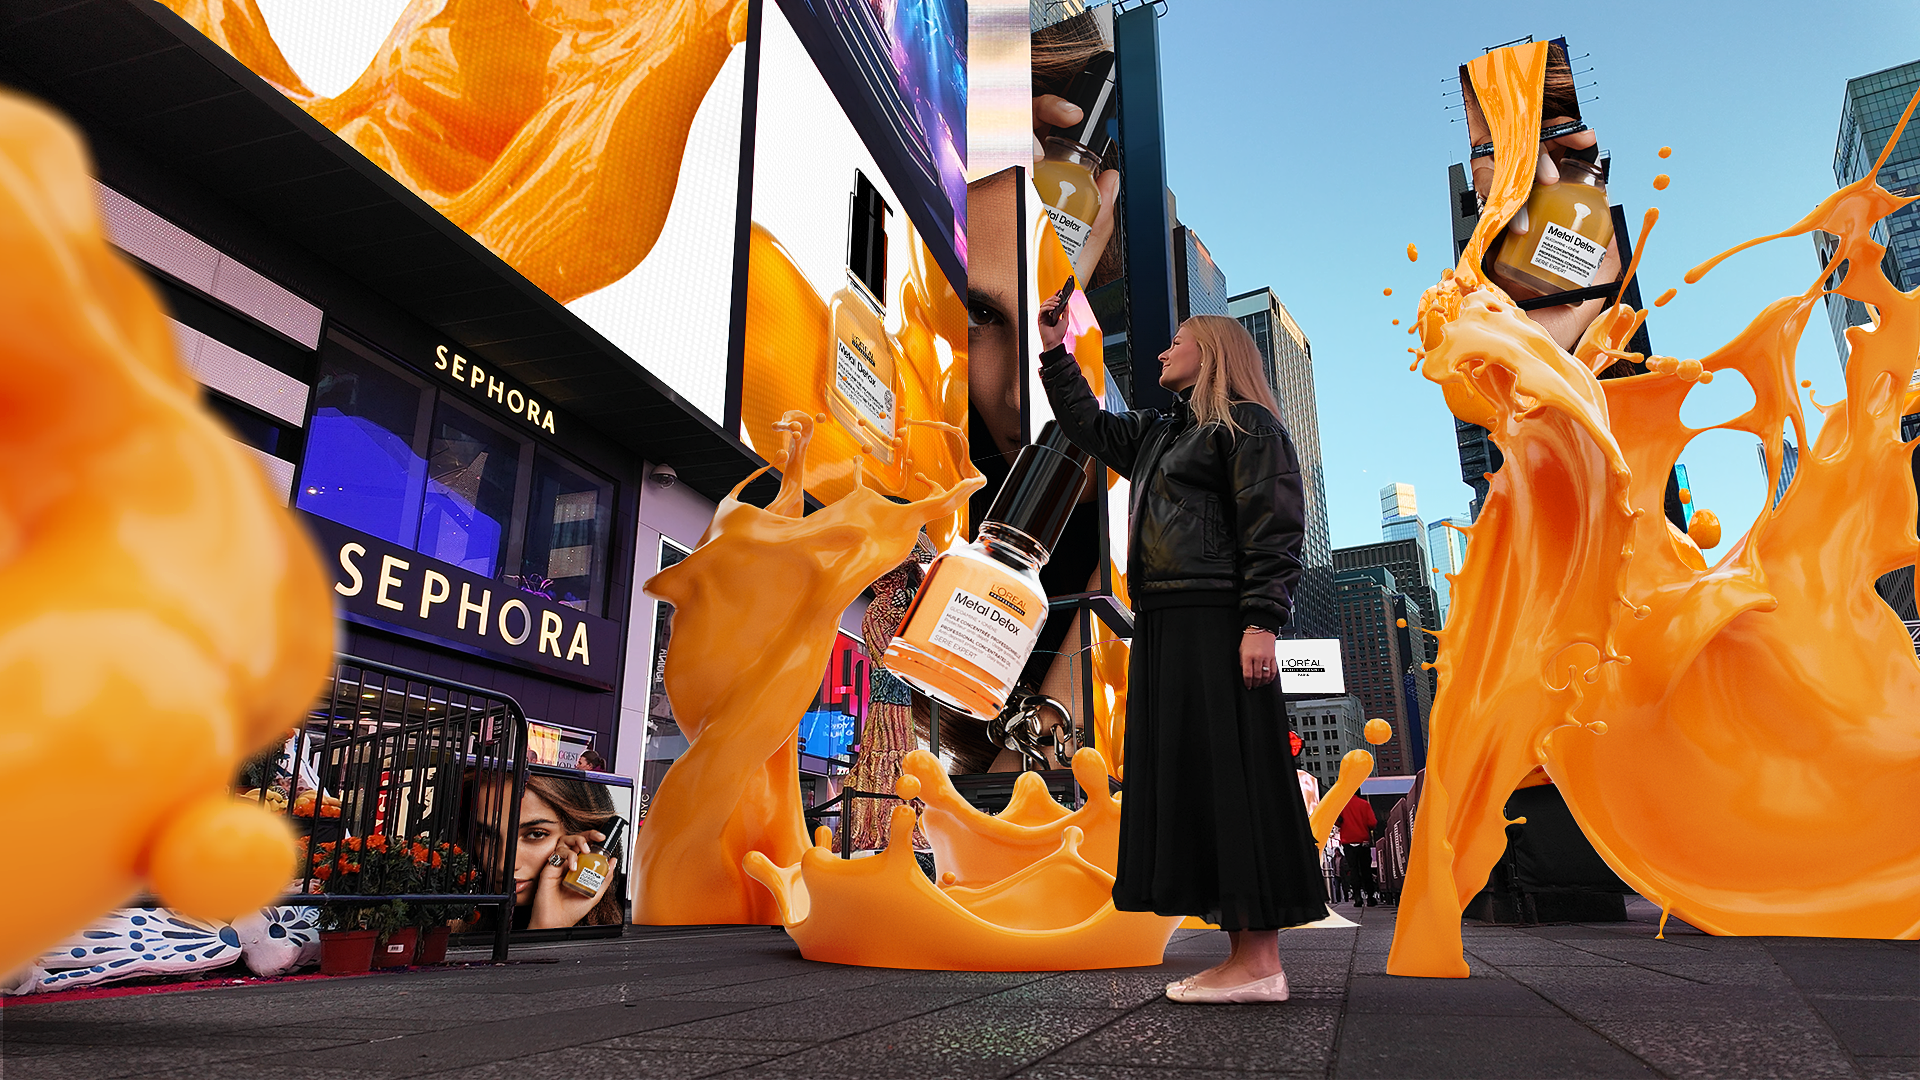 L’Oréal Professionnel generates buzz for Metal Detox launch in Sephora with immersive AR campaign in Times Square